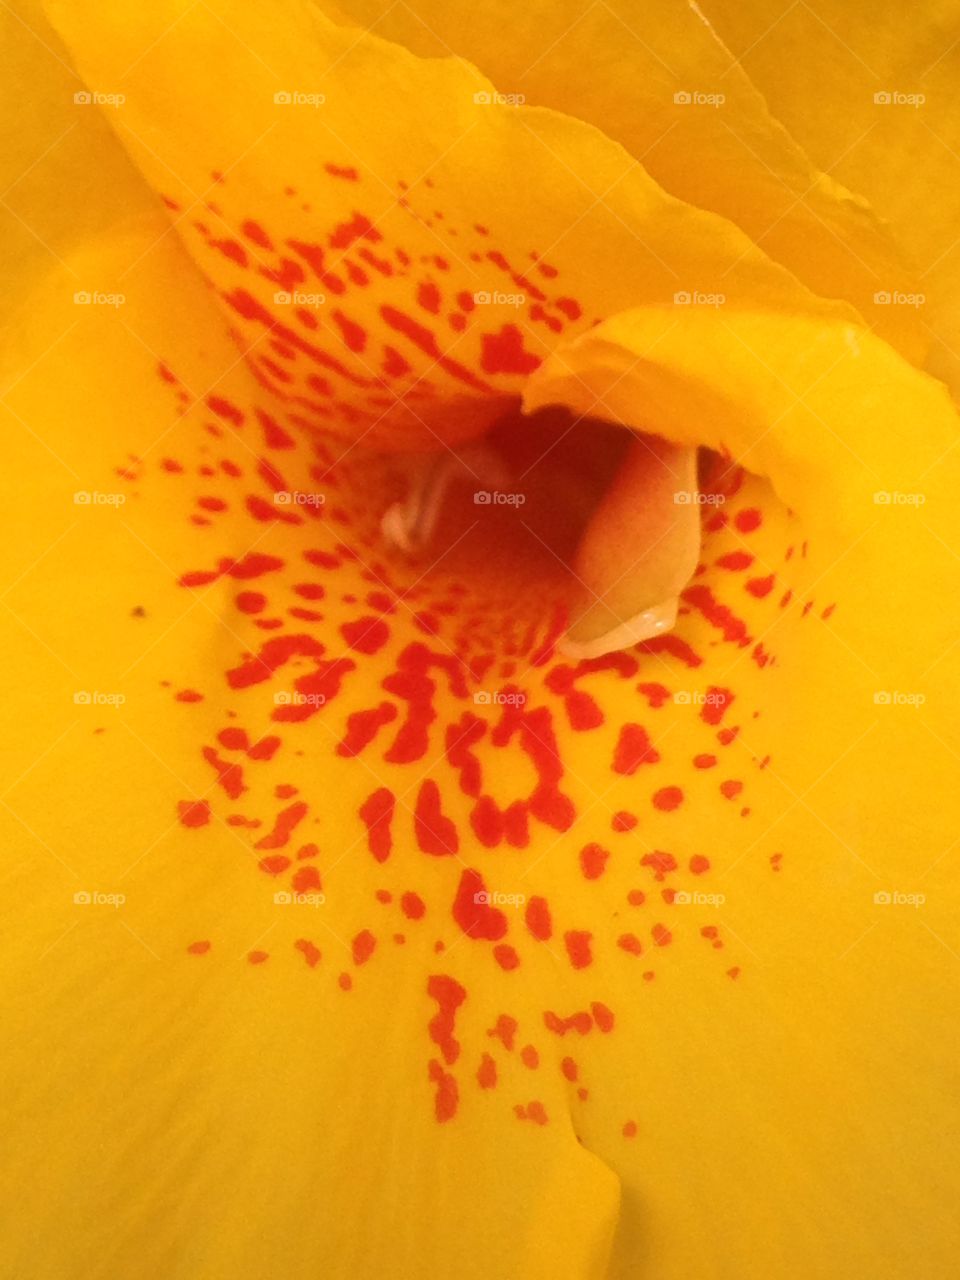 Canna lily  flower up close 